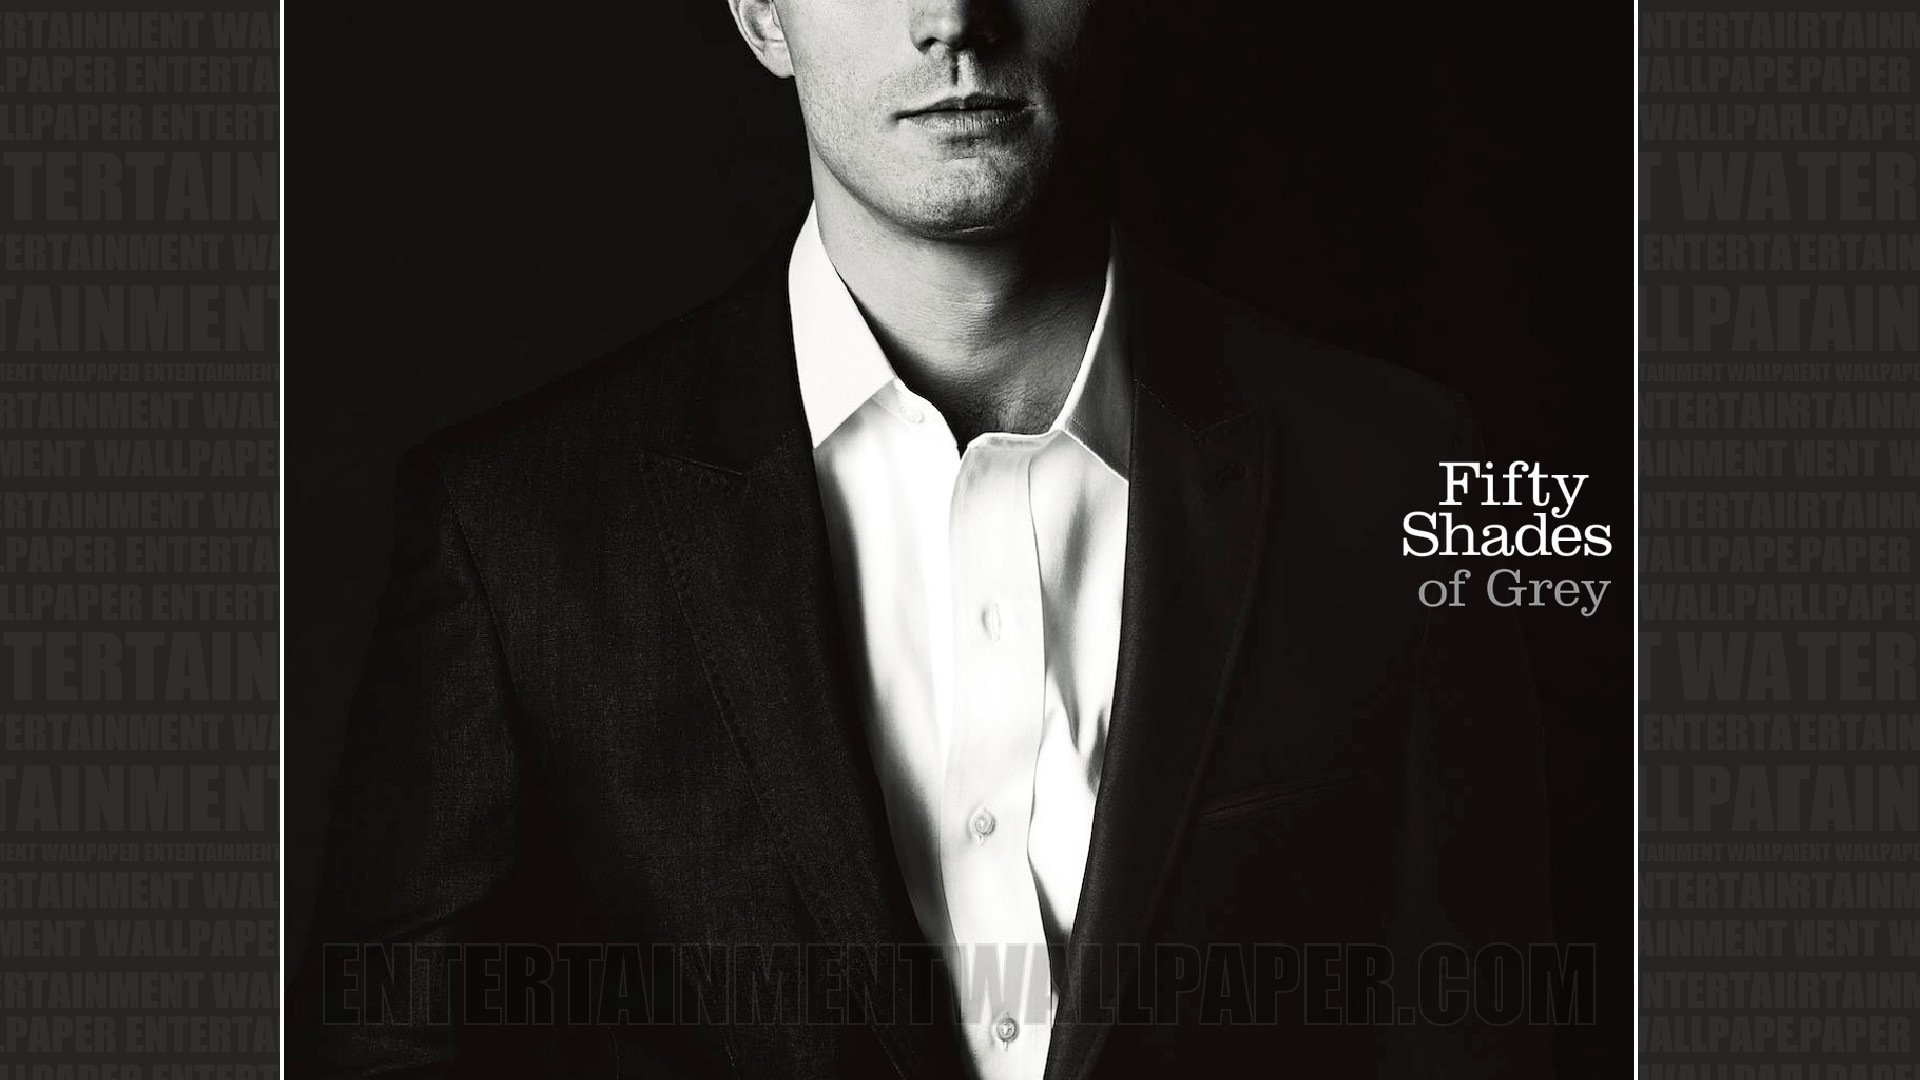 1920x1080 Fifty Shades of Grey Wallpaper - Original size, download now.